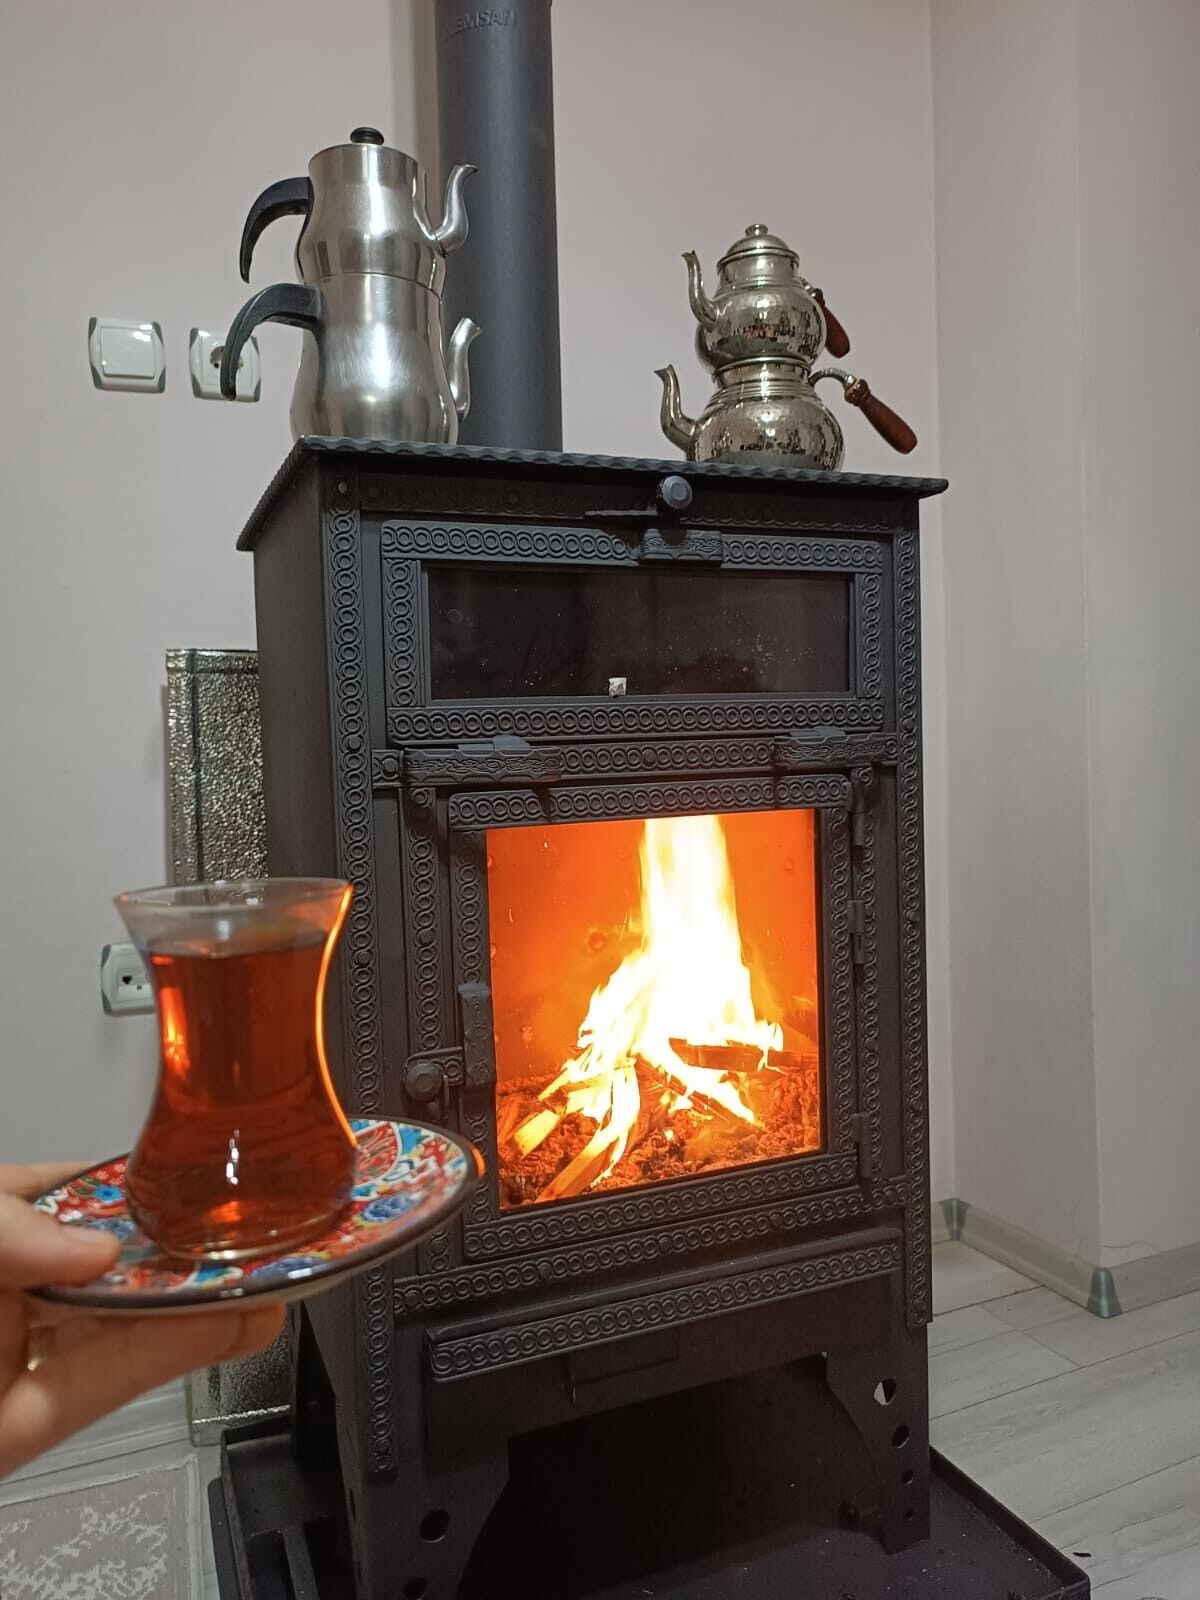 Wood Stove with Fireplace Coal Stove Heating Stove with Oven Large Wood Burning